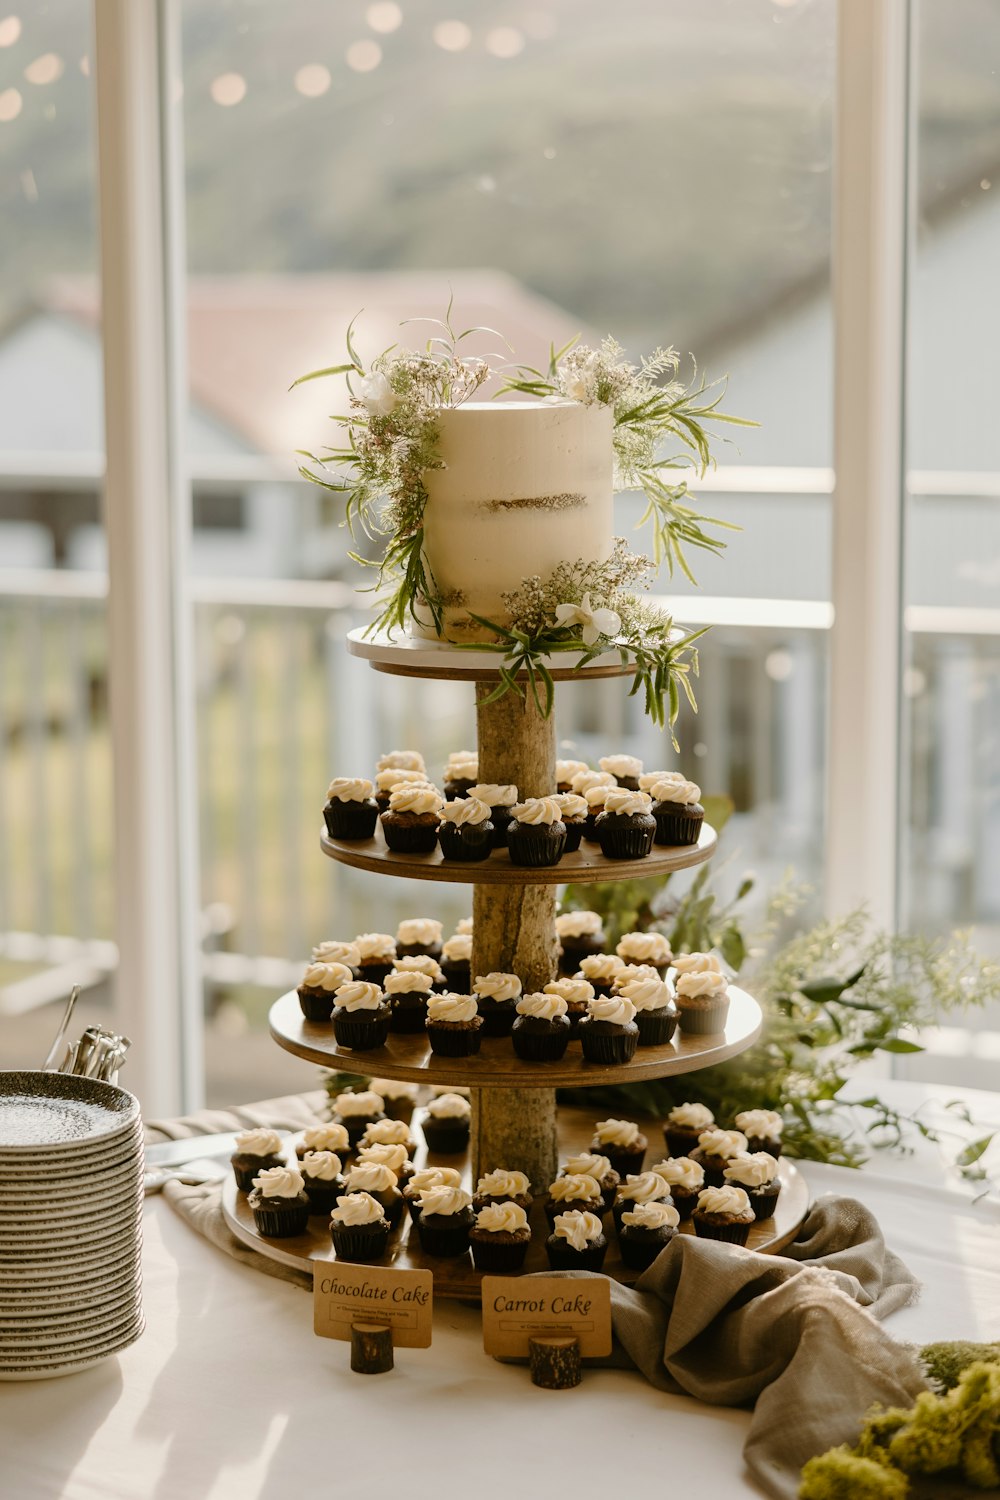 a cake and cupcakes on a table in front of a window